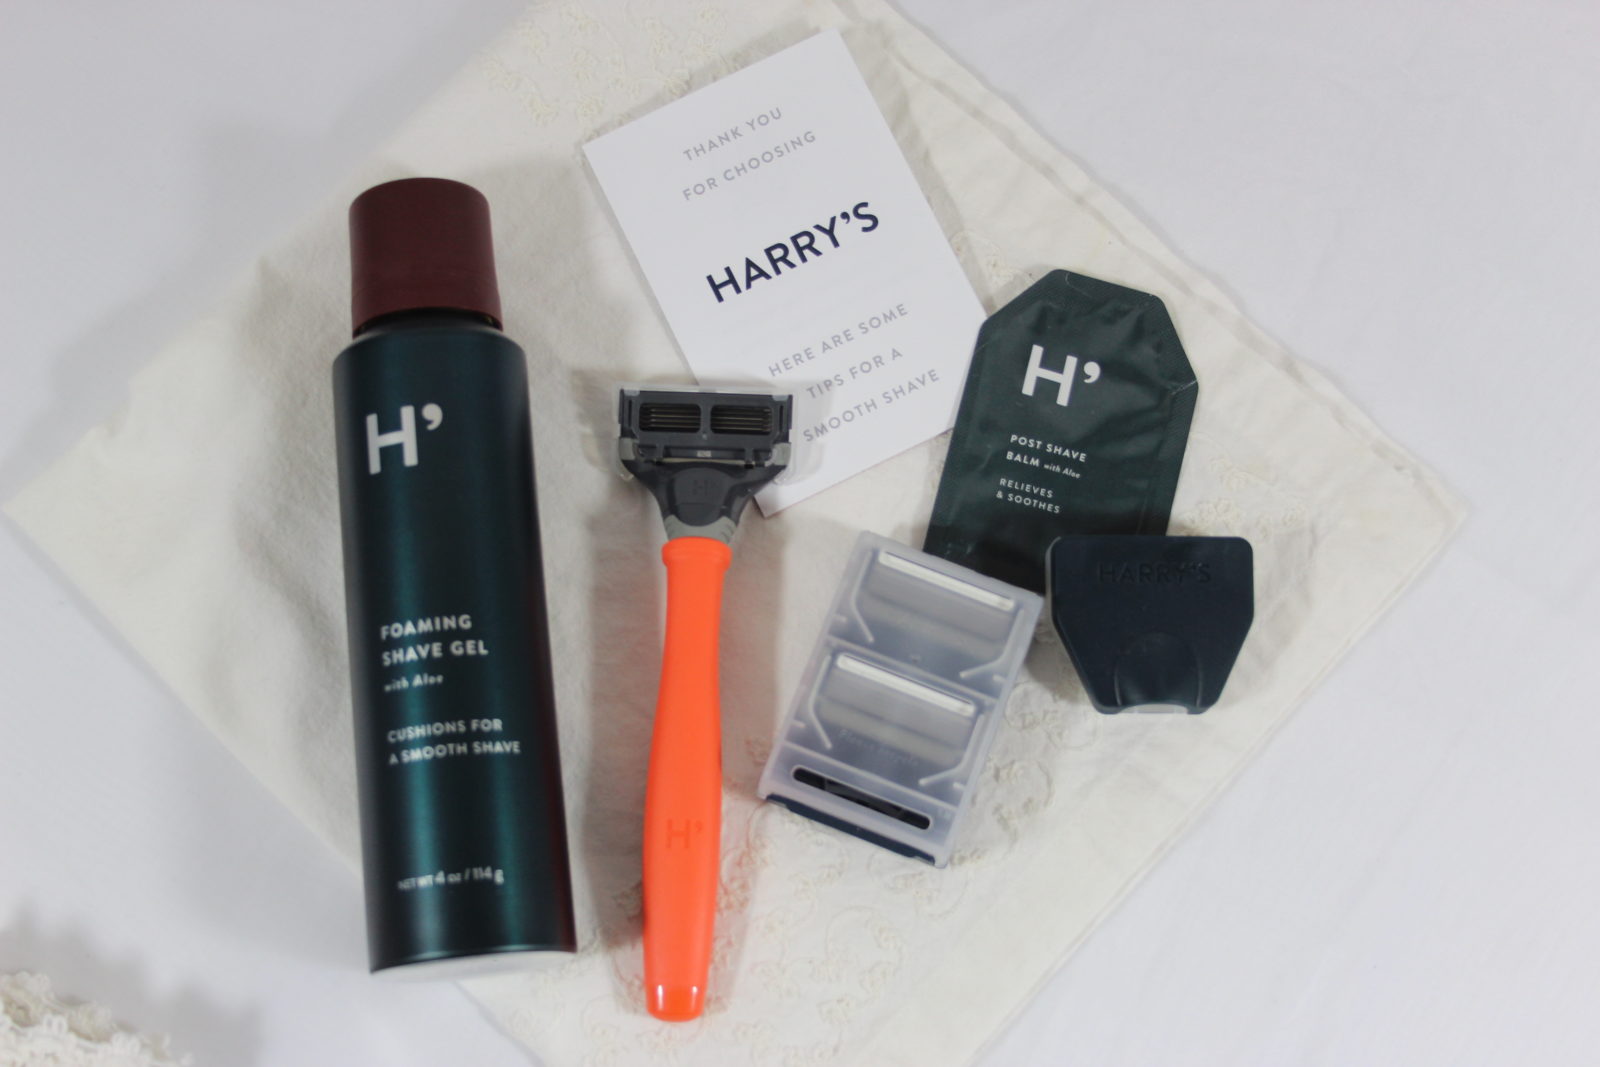 Holiday Gift Idea for Men: Harry’s Shave Kit